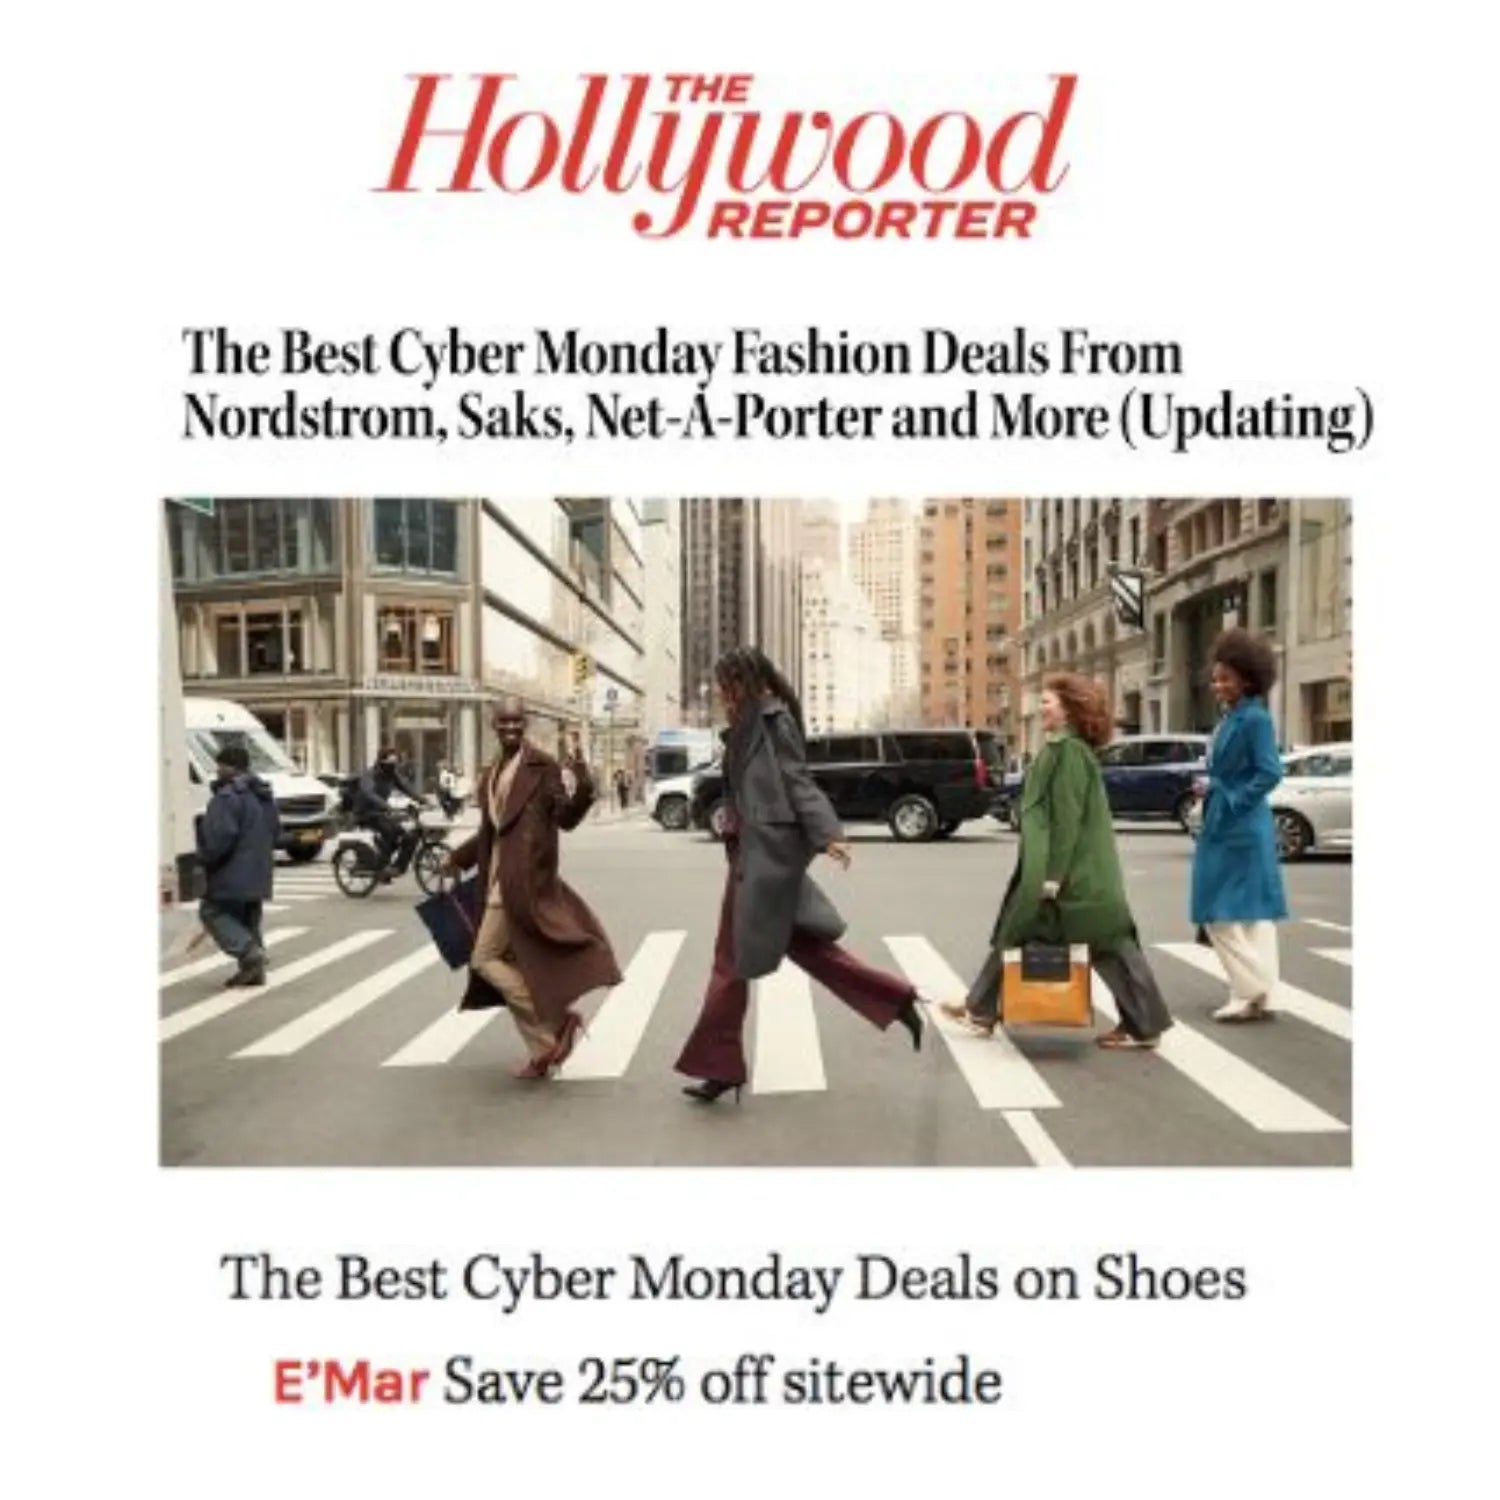 The Hollywood Reporter - Best Cyber Monday Deals on Shoes